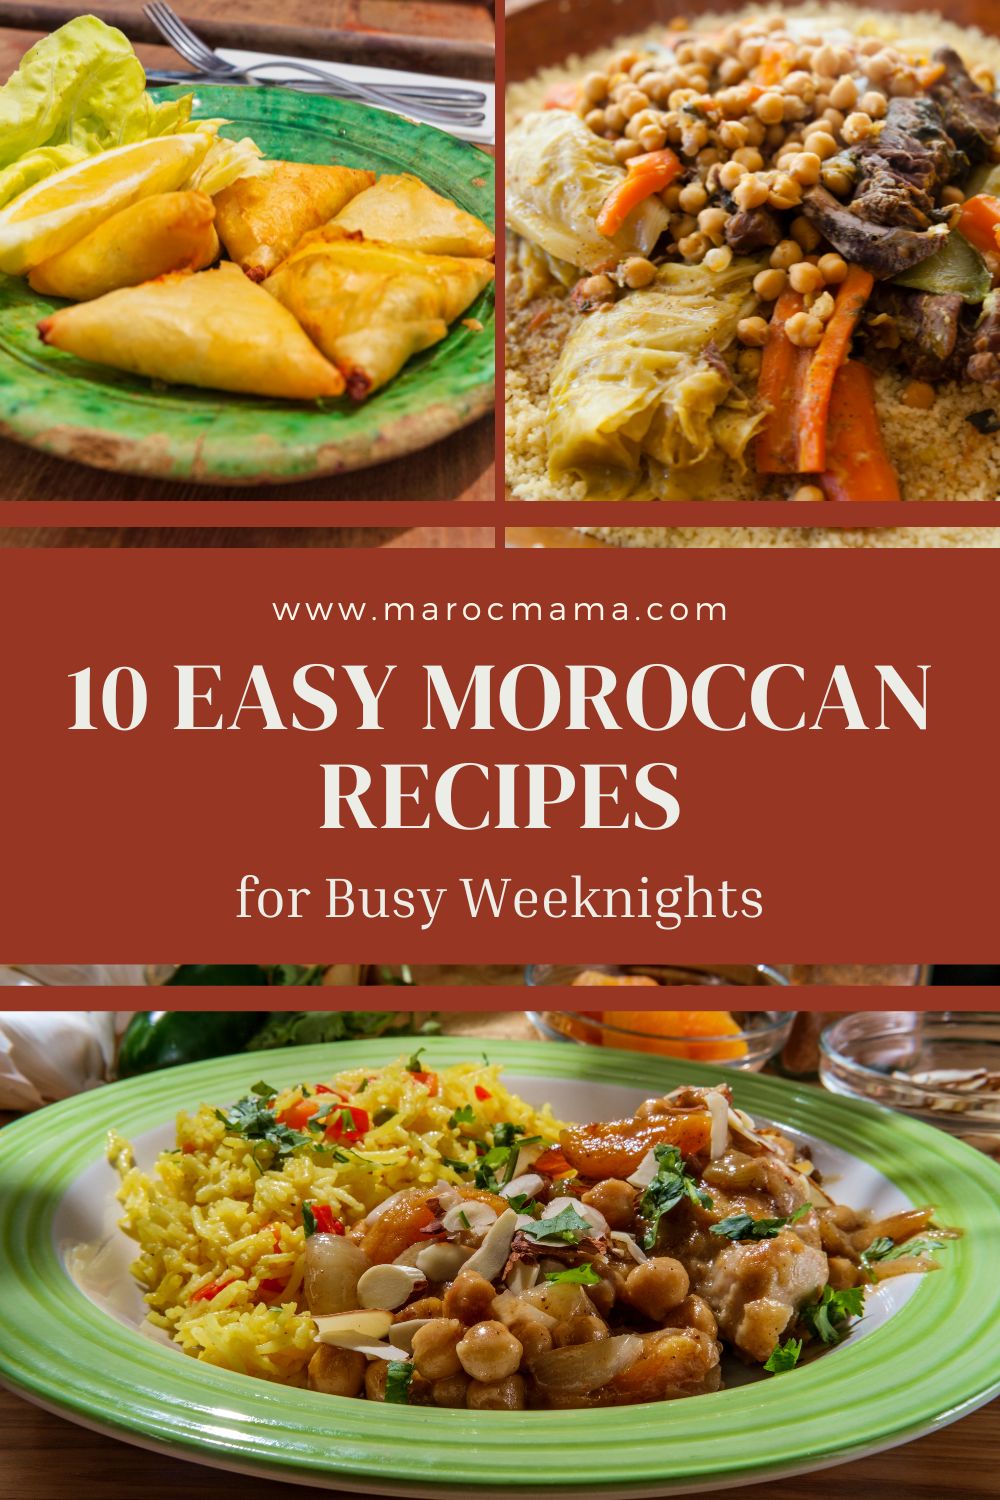 Easy Moroccan recipes with the text 10 Easy Moroccan Recipes for Busy Weeknights